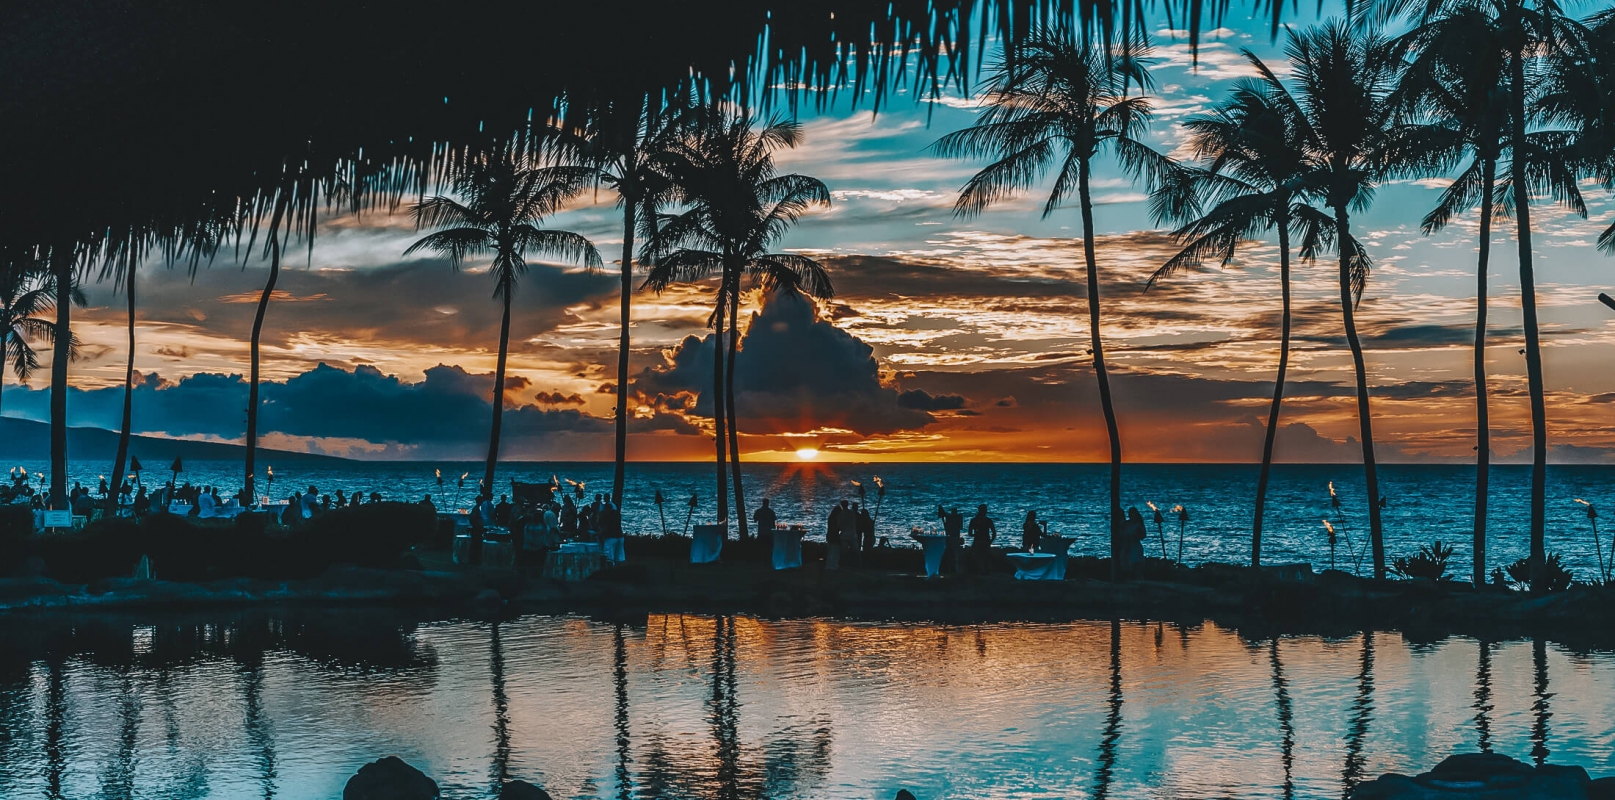 shadow of palm trees reflect off the water in the foreground while the sun sets over the ocean creating an orange and blue sky